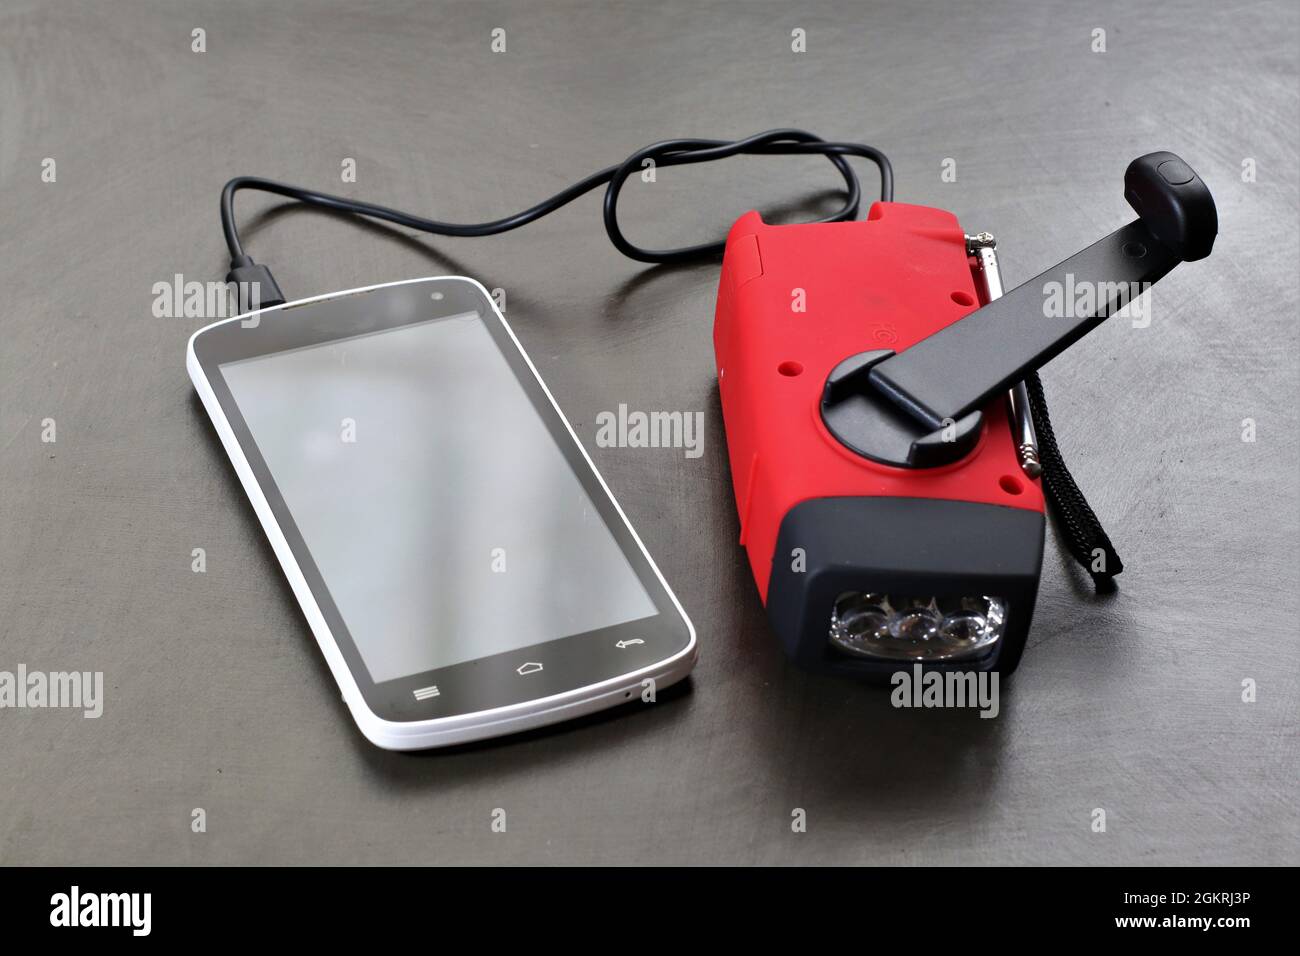 When you're in an emergency situation and don't have an outlet to charge your cell phone, this hand crank phone charger can be a life saver. Stock Photo